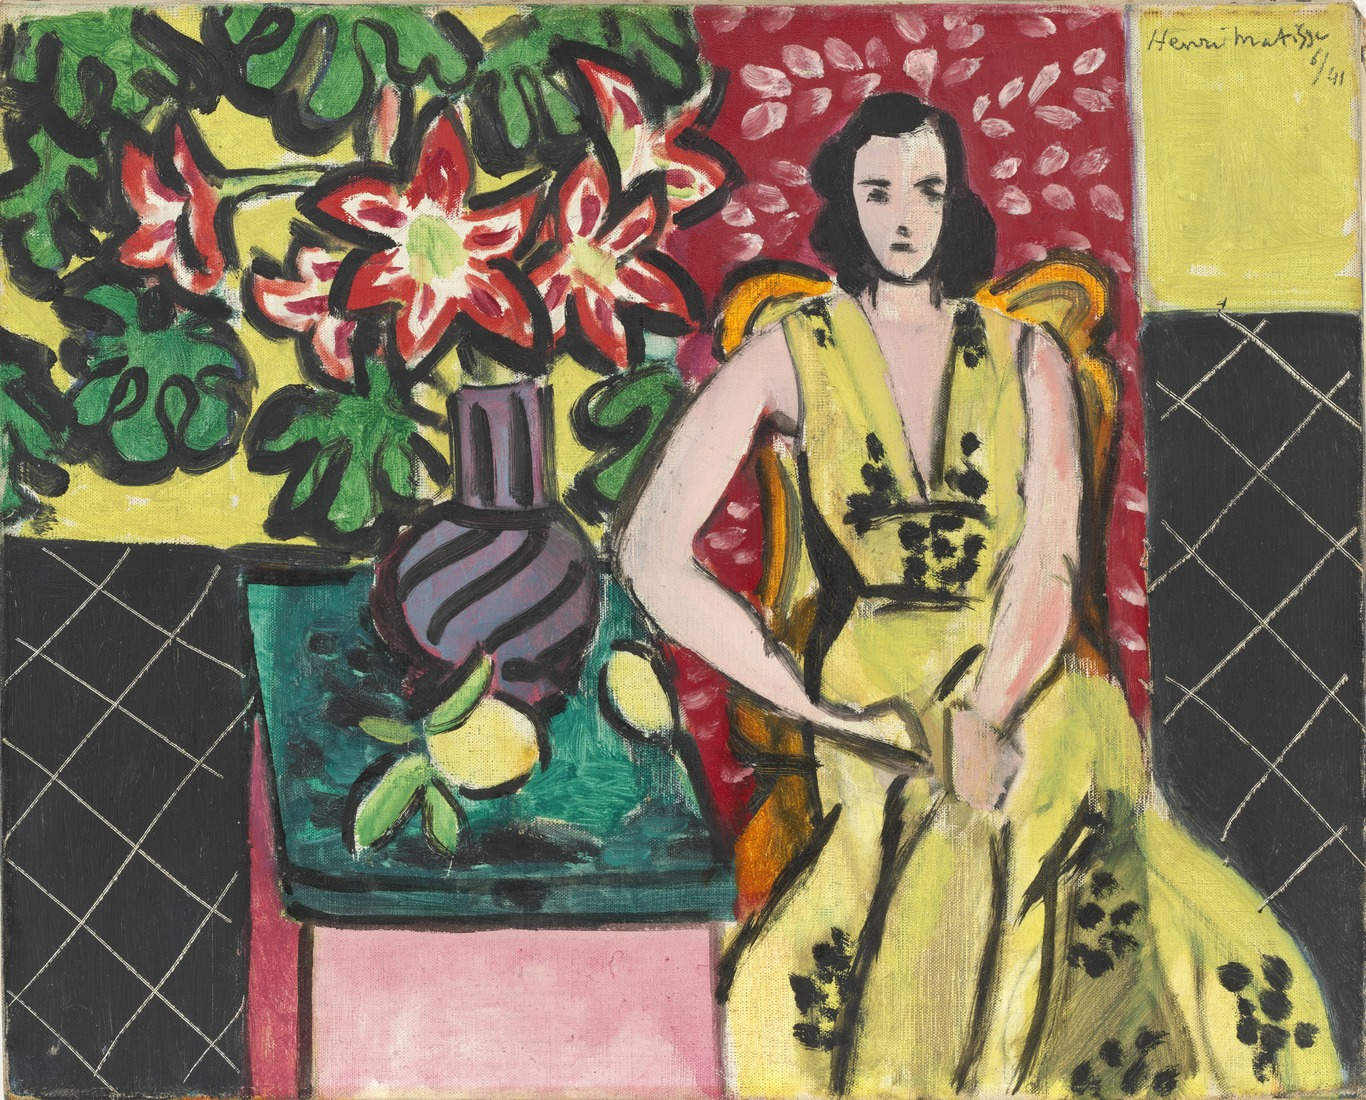 Seated Woman with a Vase of Amaryllis (1941).